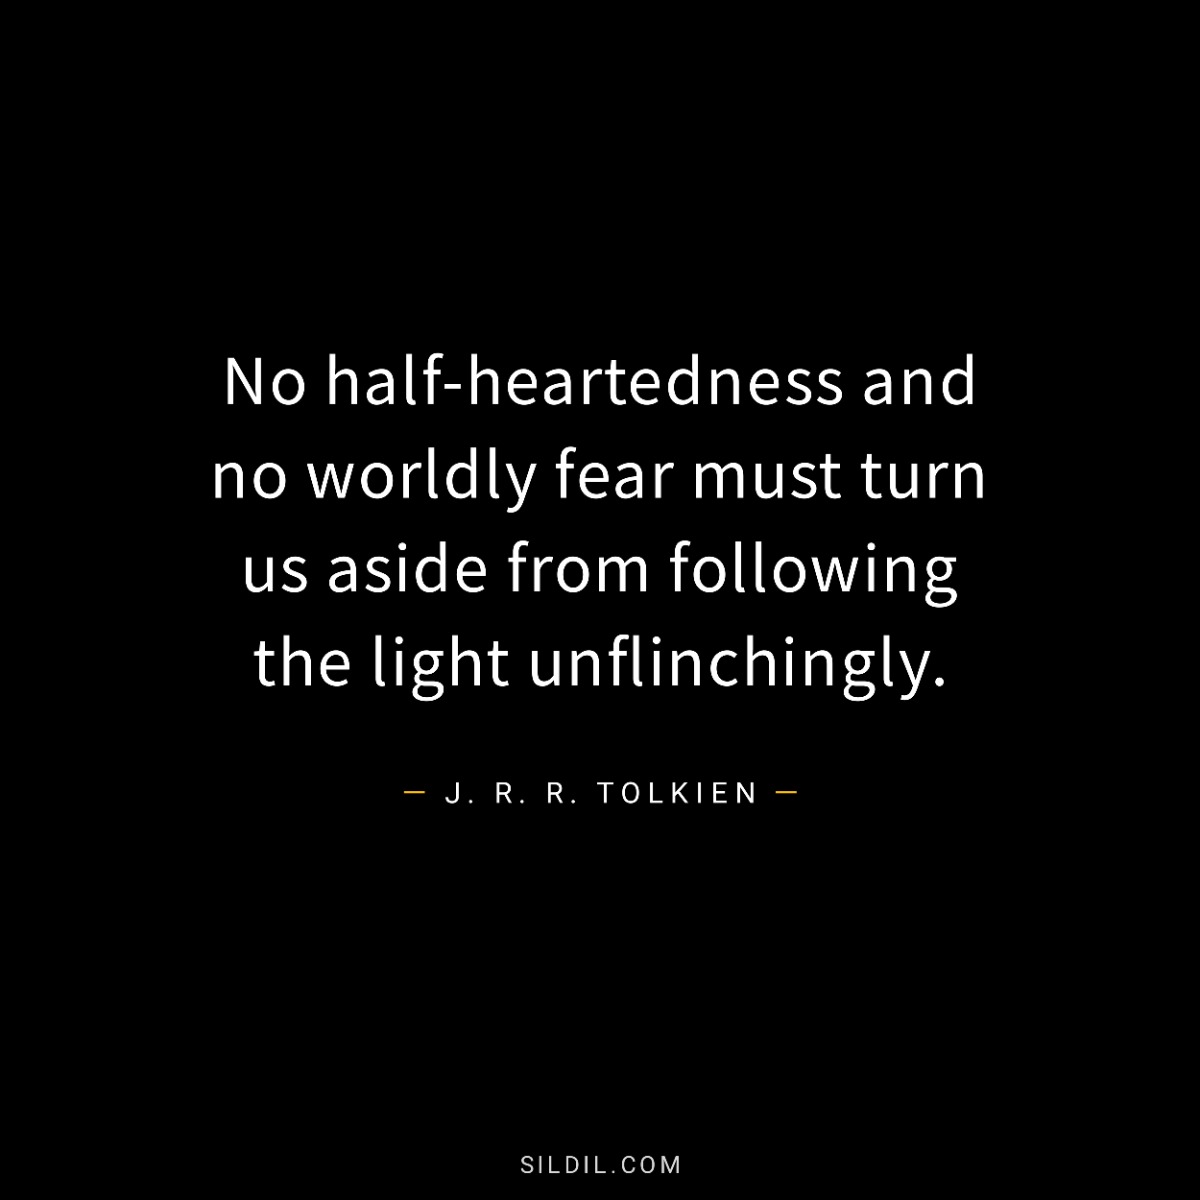 No half-heartedness and no worldly fear must turn us aside from following the light unflinchingly.